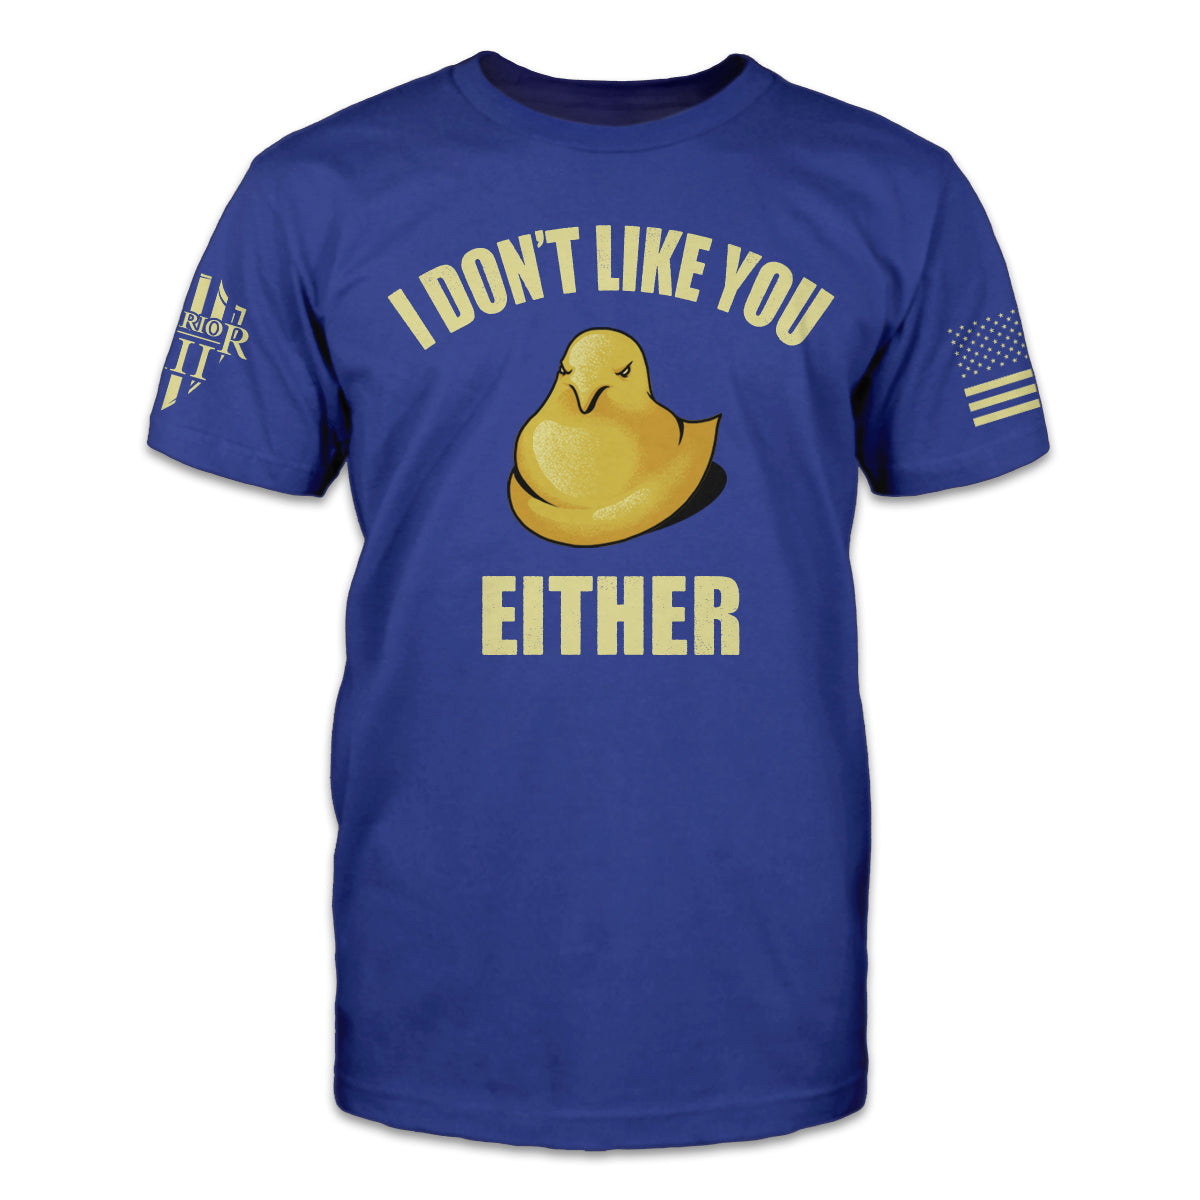 A blue shirt with an image of an angry marshmallow chick with the words, "I don't like you either."